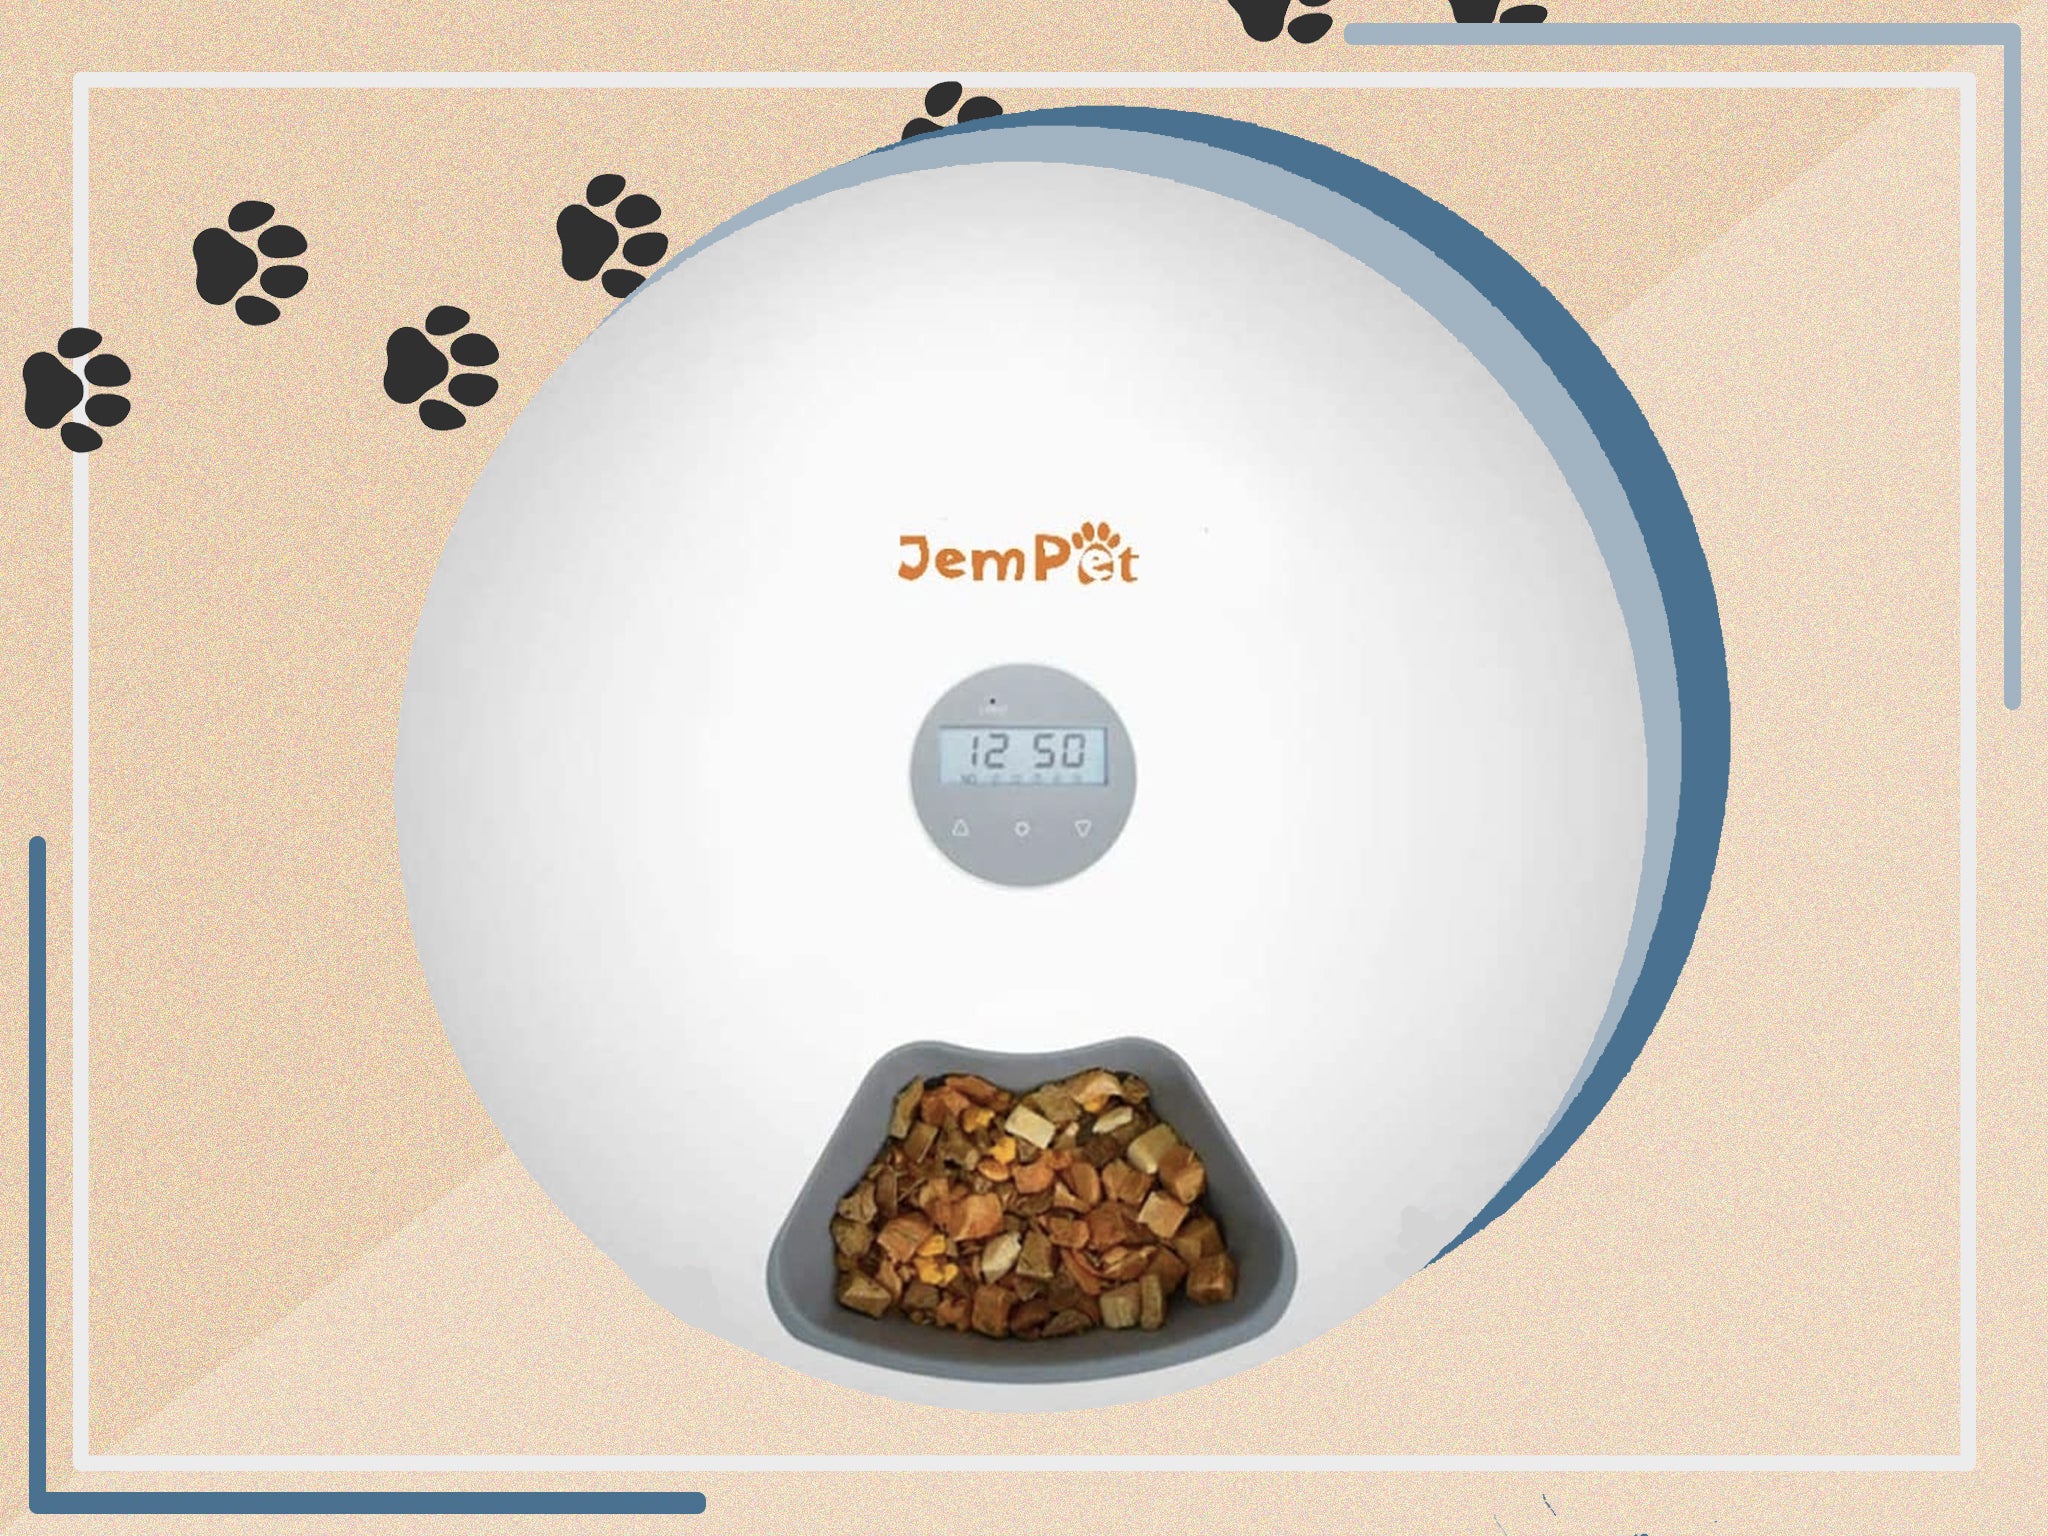 Jempet’s automatic pet feeder stopped my cat waking me up at 3am